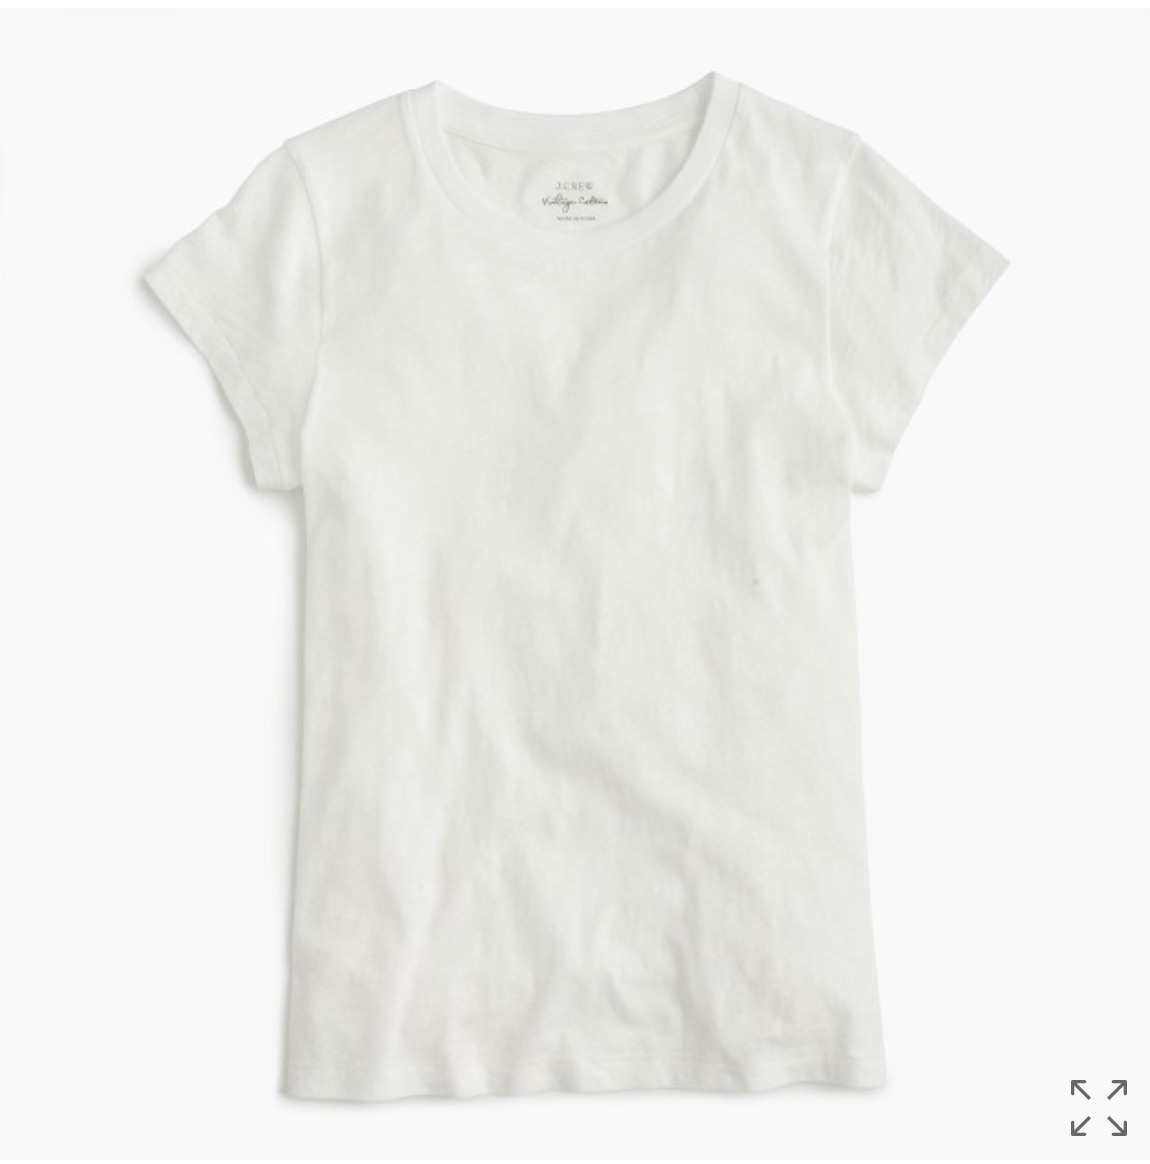 J Crew T-shirt - Signature Five - A Personal Styling Service, Zurich